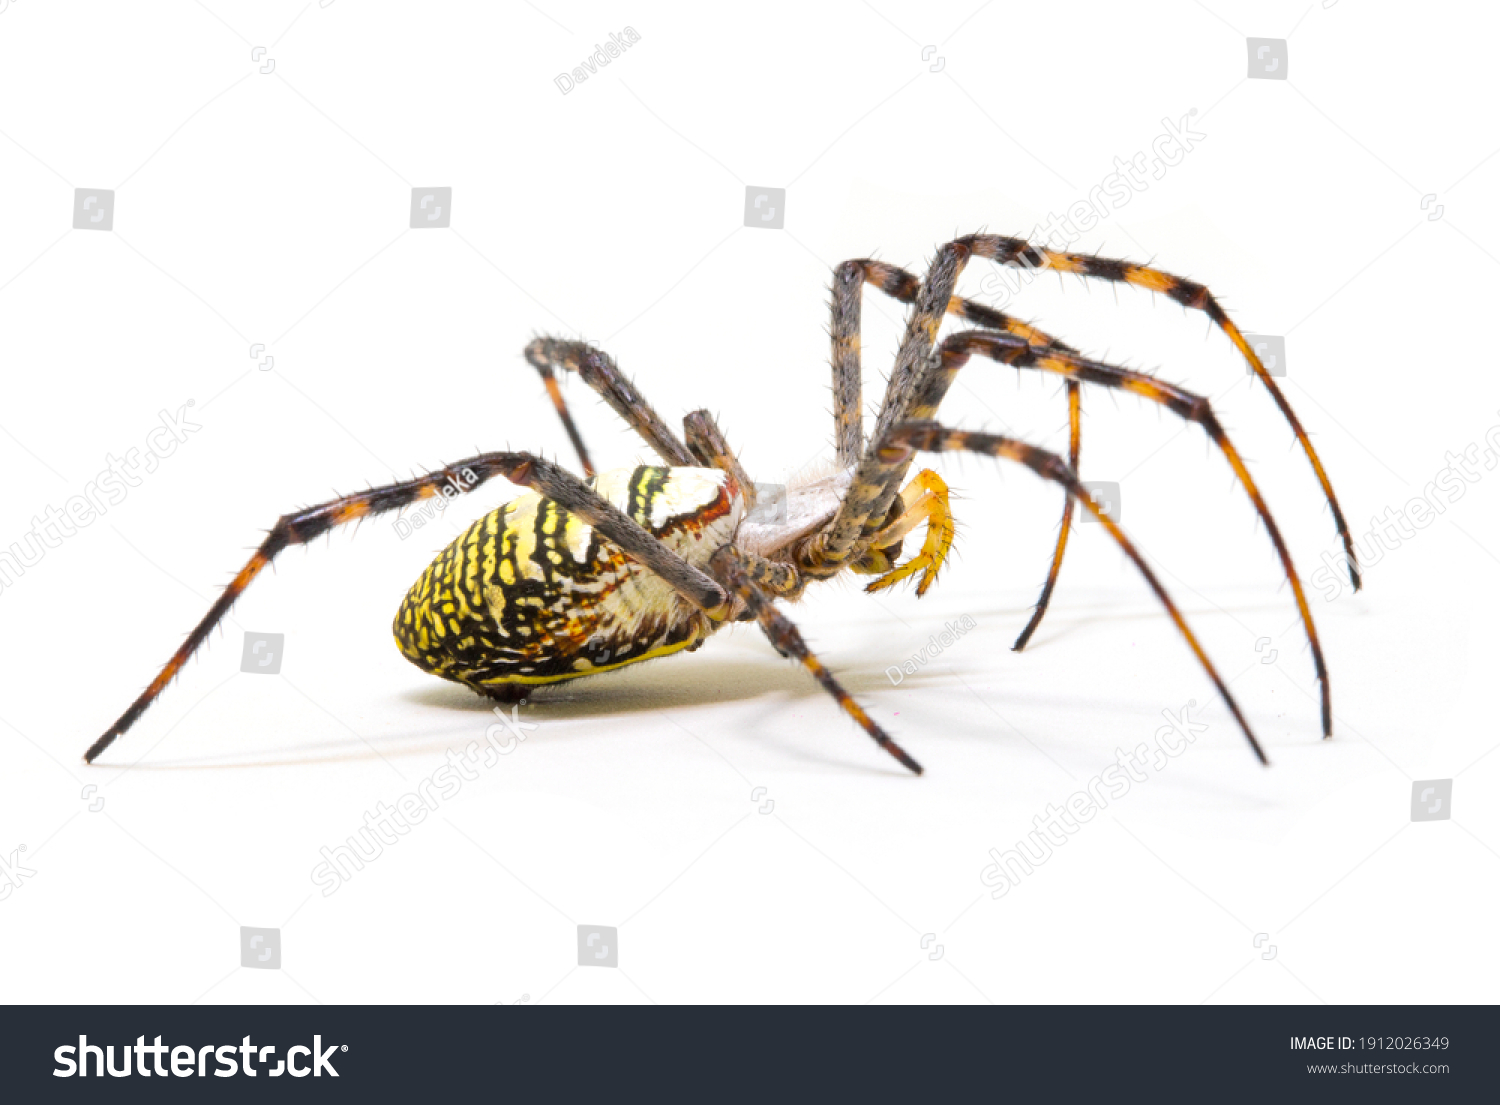 Colorful spider on white background, close up photo. Yellow black spider on white background. Tropical insect crab spider closeup photo. Exotic spider detailed macrophoto. Striped insect. Creepy bug.  #1912026349